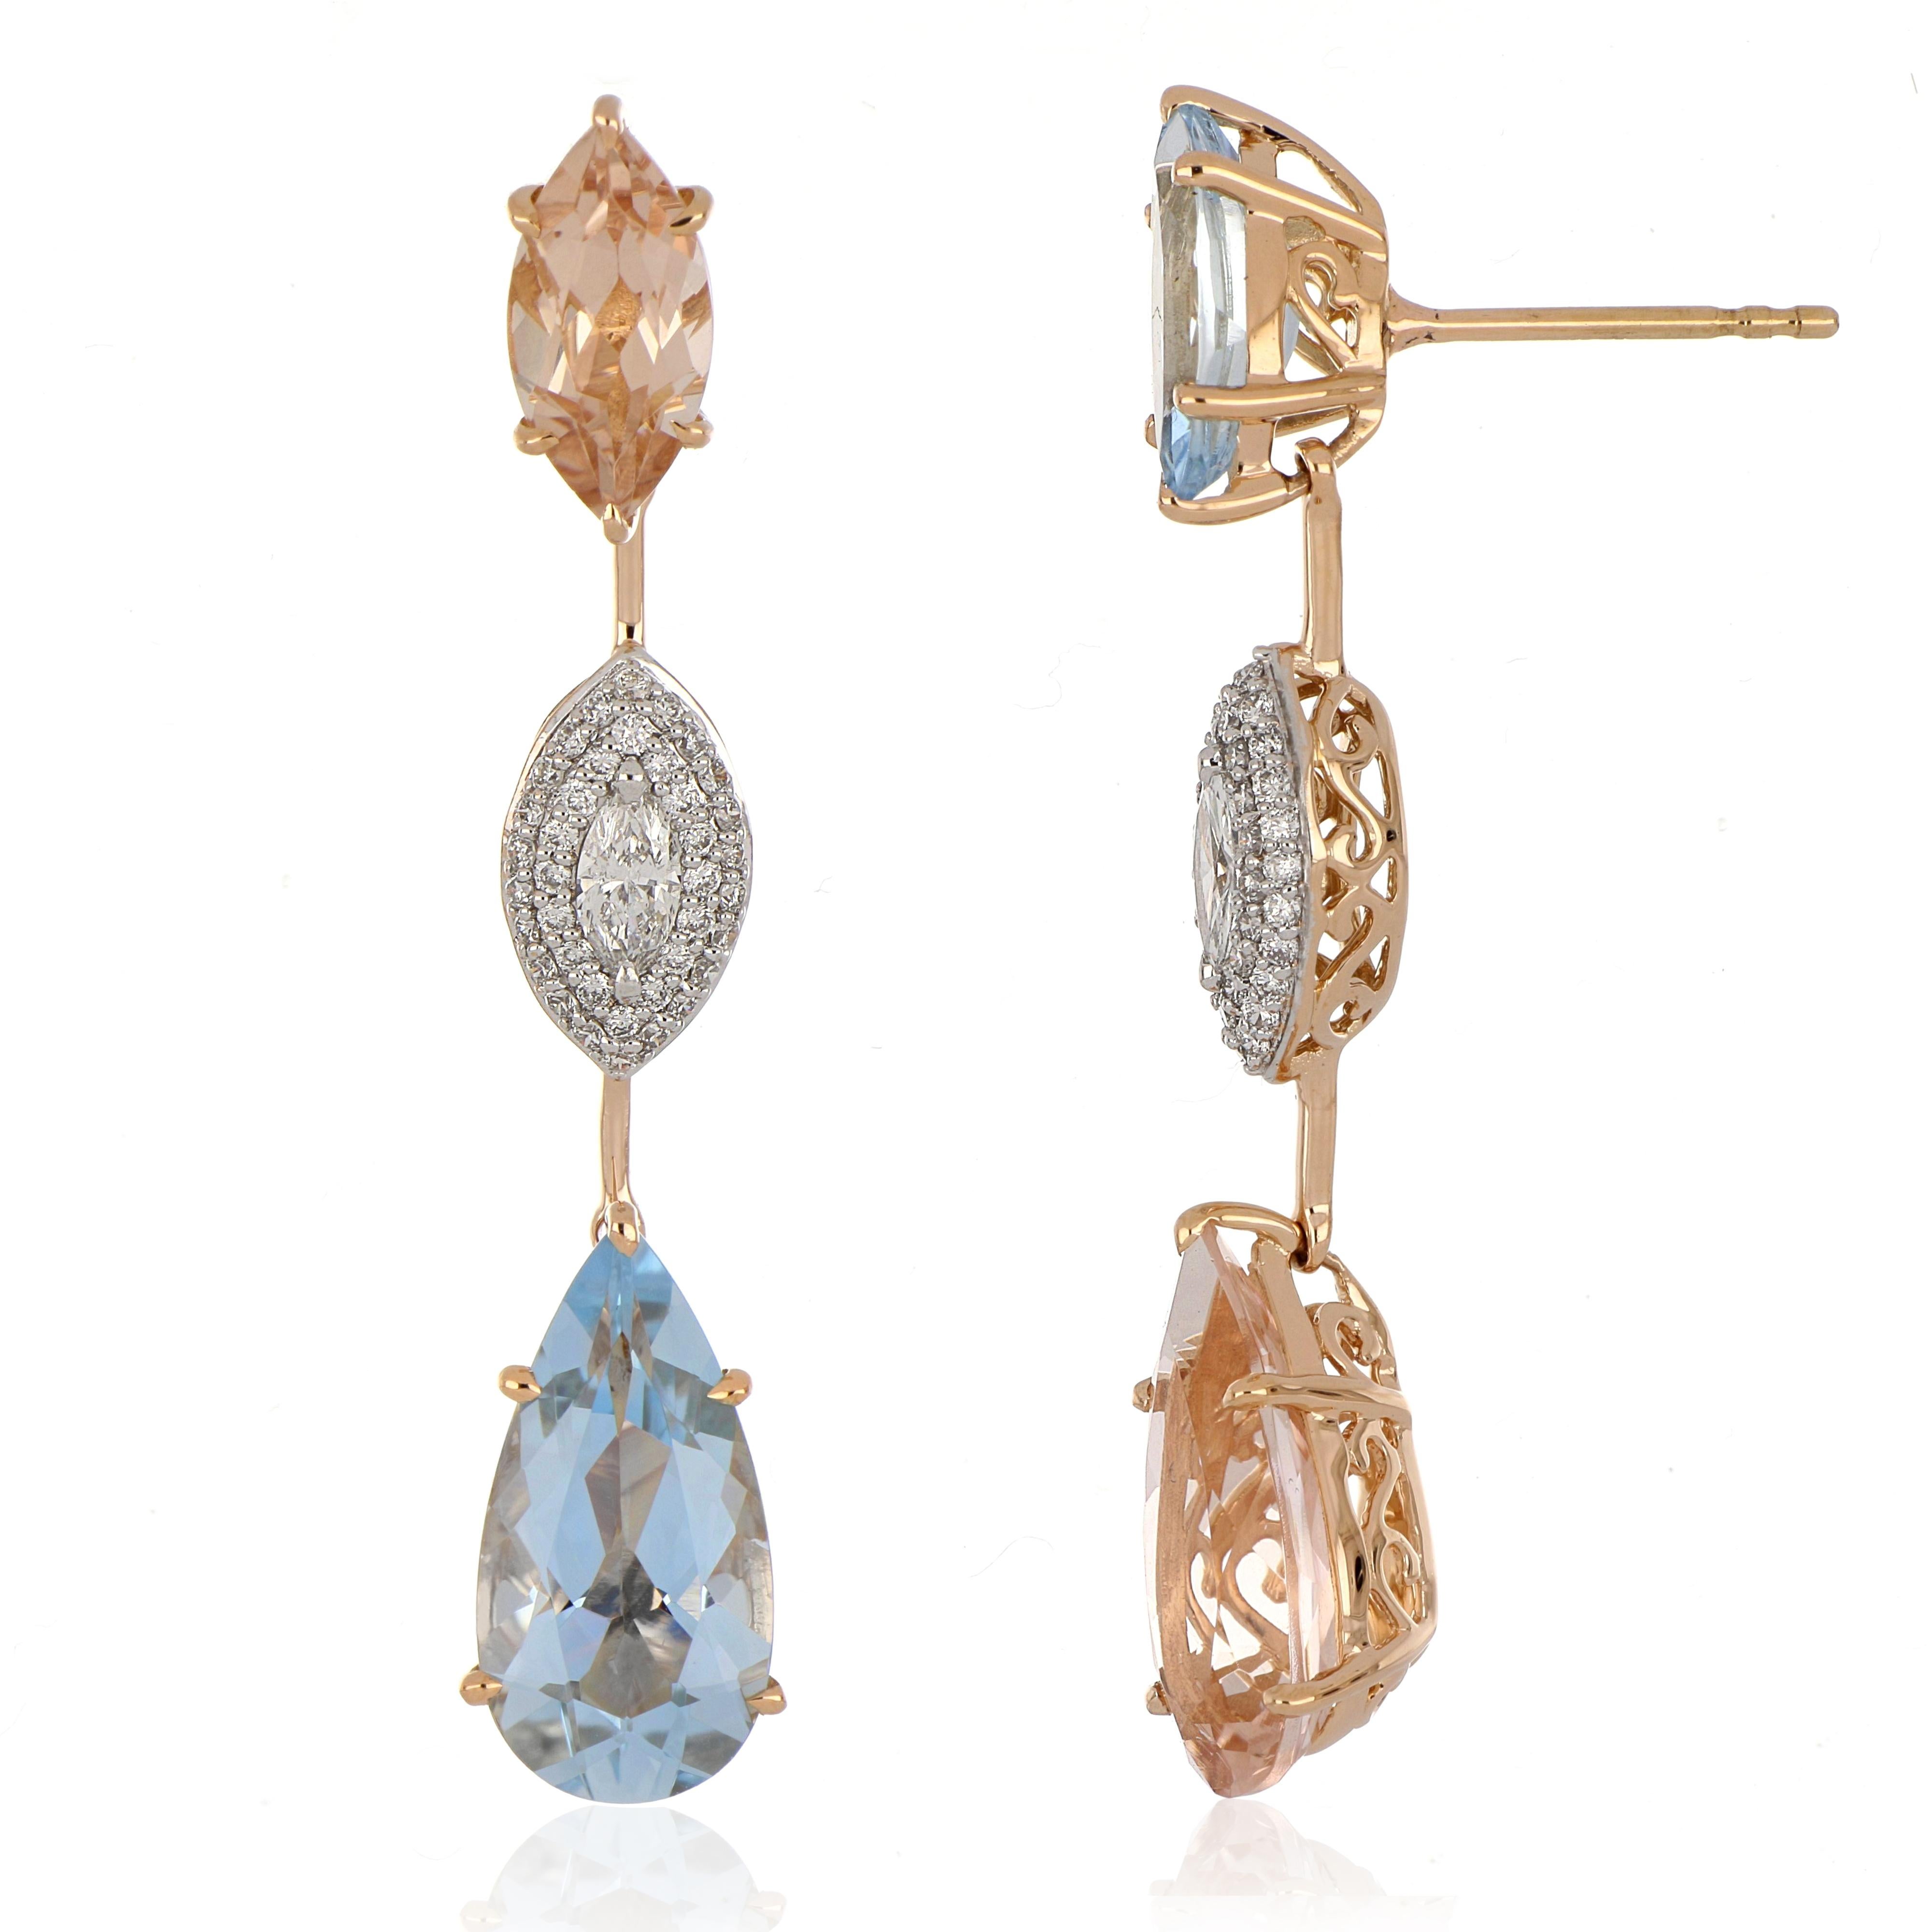 Elegant and Exquisitely detailed Mismatched Dangling Gold Earrings, set with 3.48 Ct (total ) Aquamarine, 3.65 Cts (total)  Morganite, accented with Marquise and Round Diamonds, weighing approx. 0.52 Cts. total carat weight.  Beautifully Hand